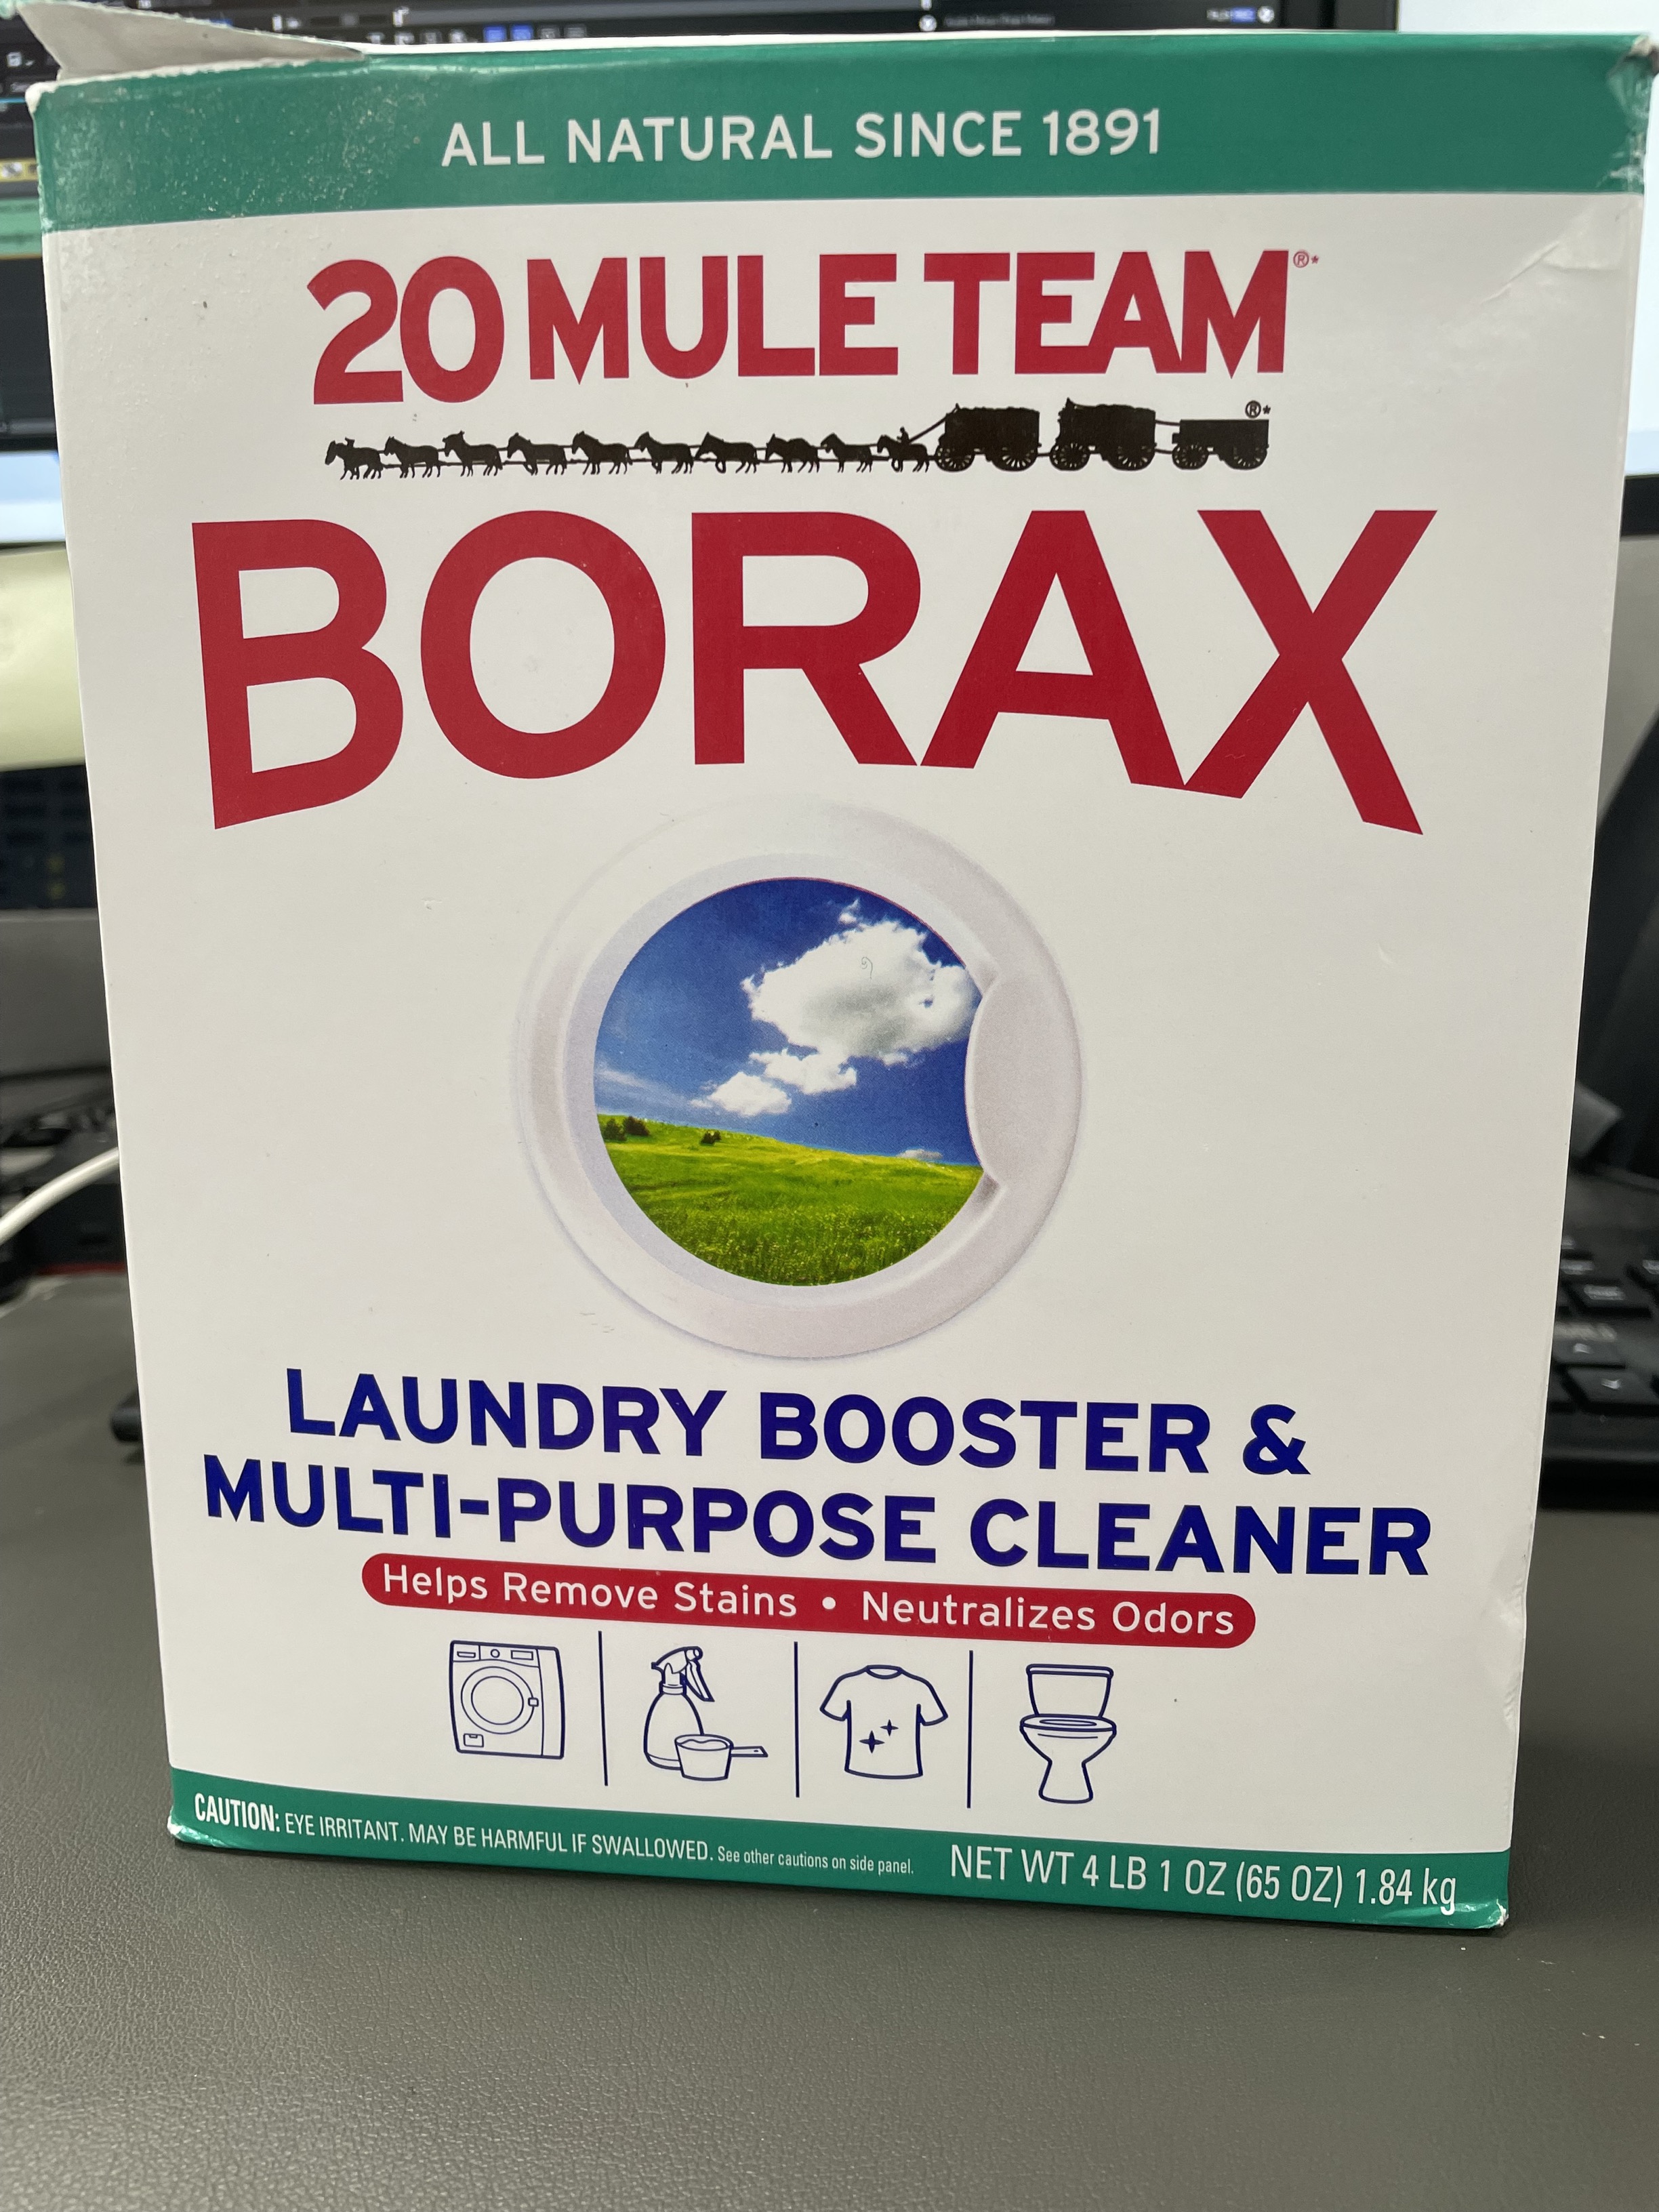 Borax challenge: The latest harmful health trend taking over TikTok and why  you should avoid it